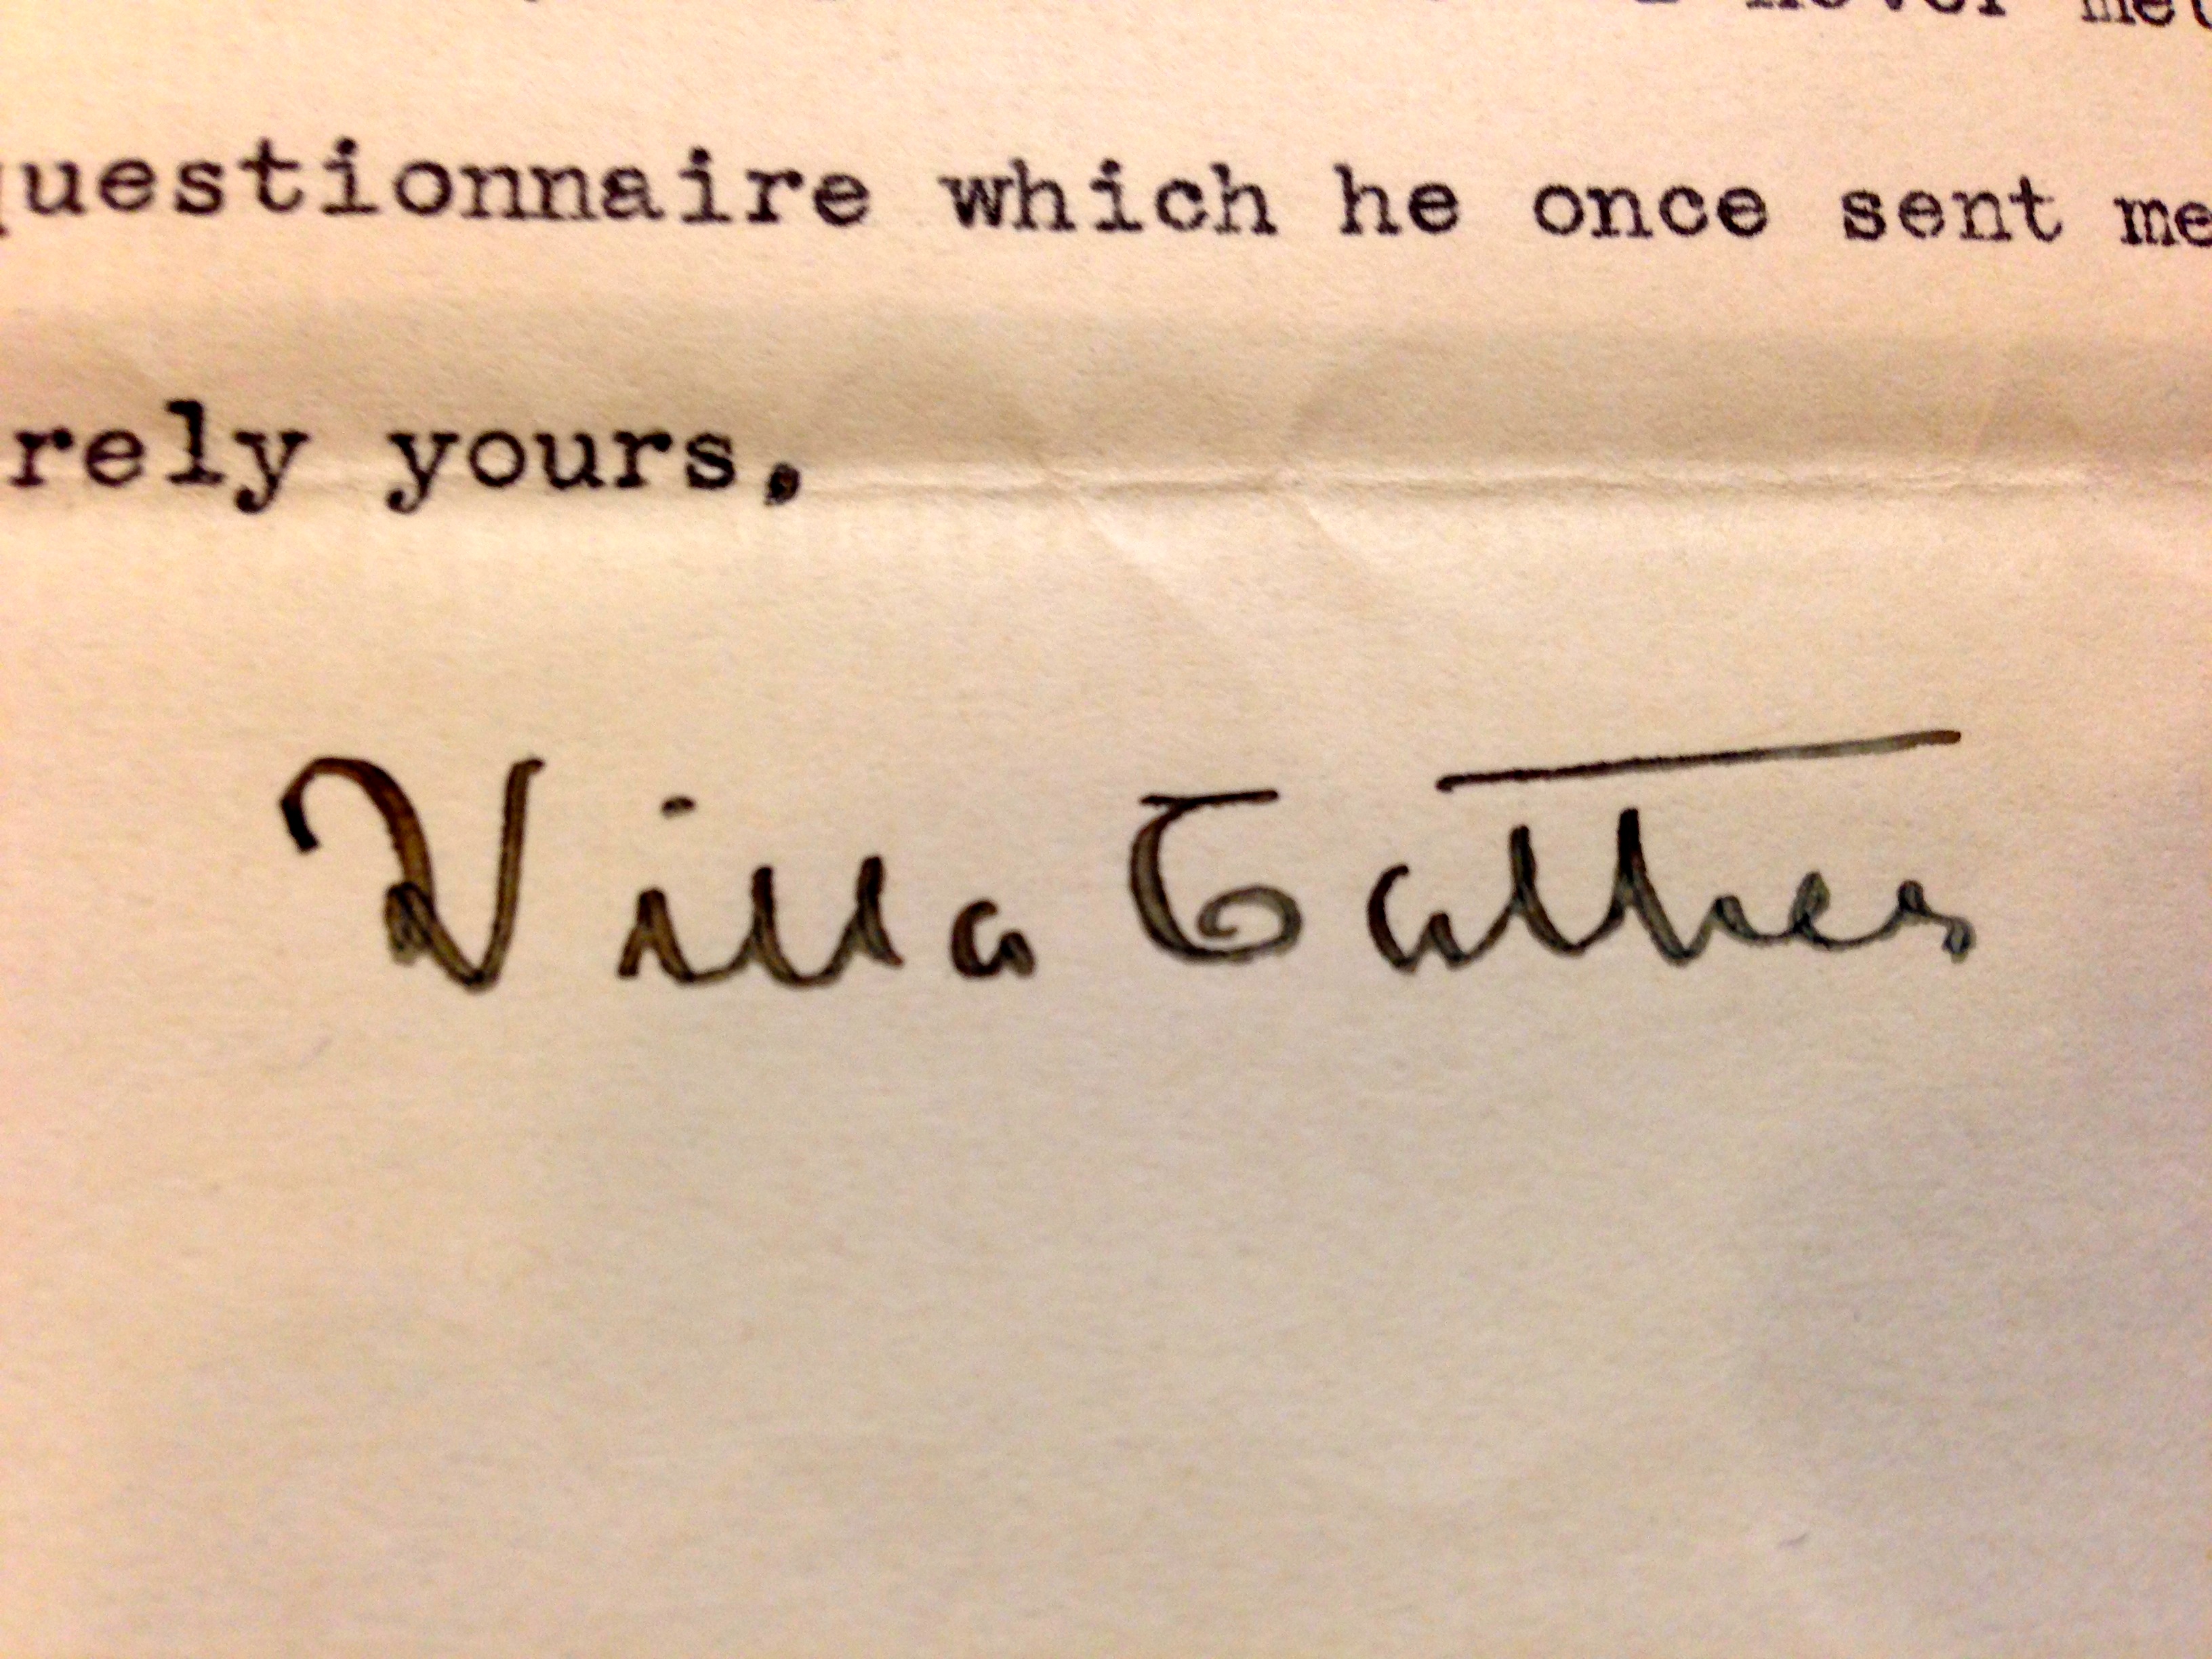 Willa Cather's signature from her letter to (Emily Caldwell)